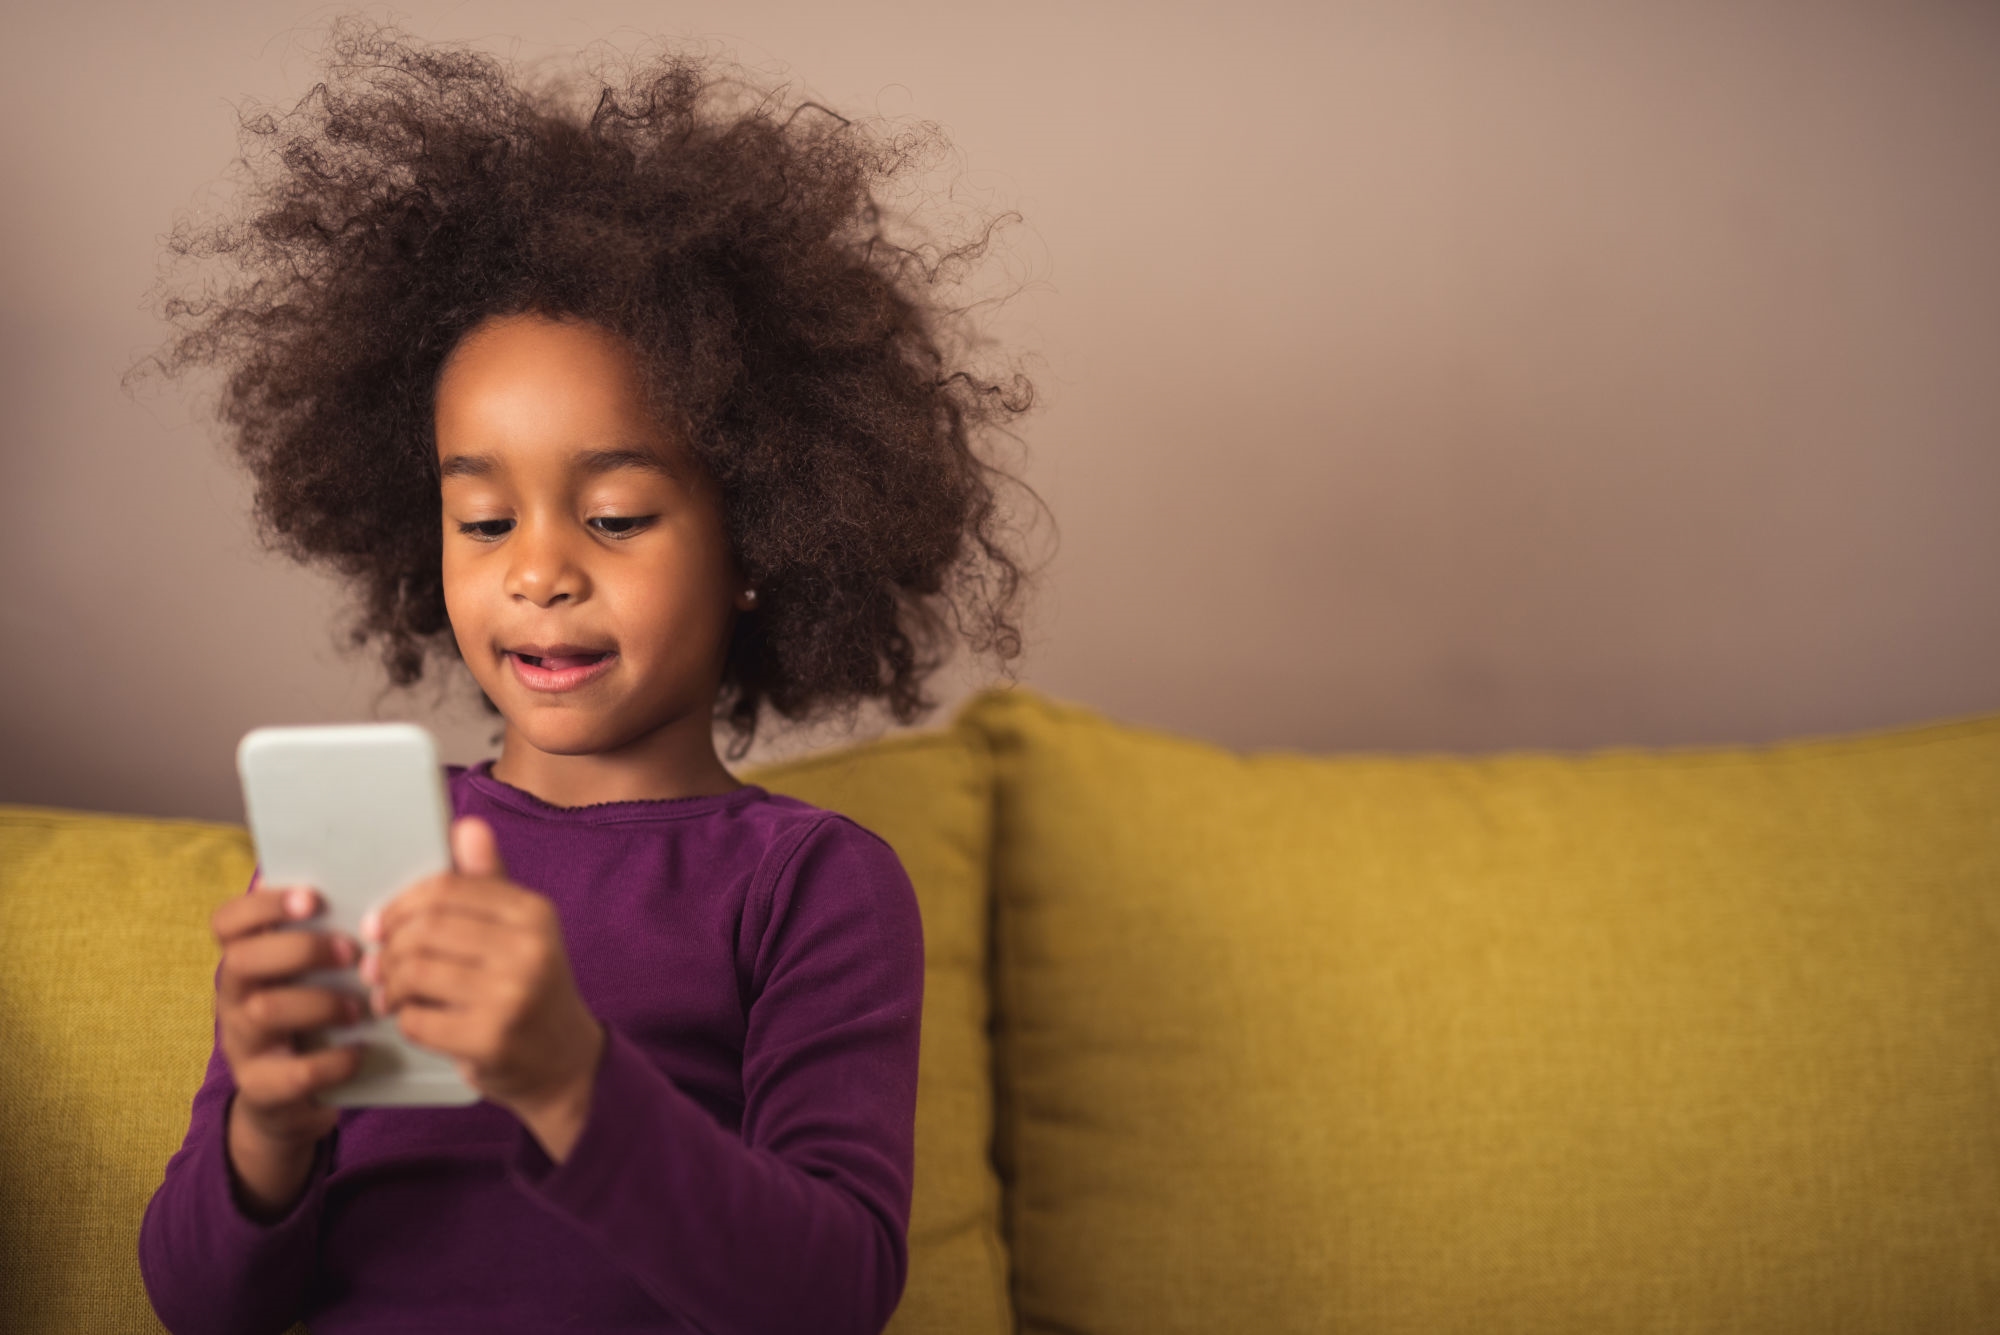 How to set up a phone or tablet for a child | DeviceDaily.com